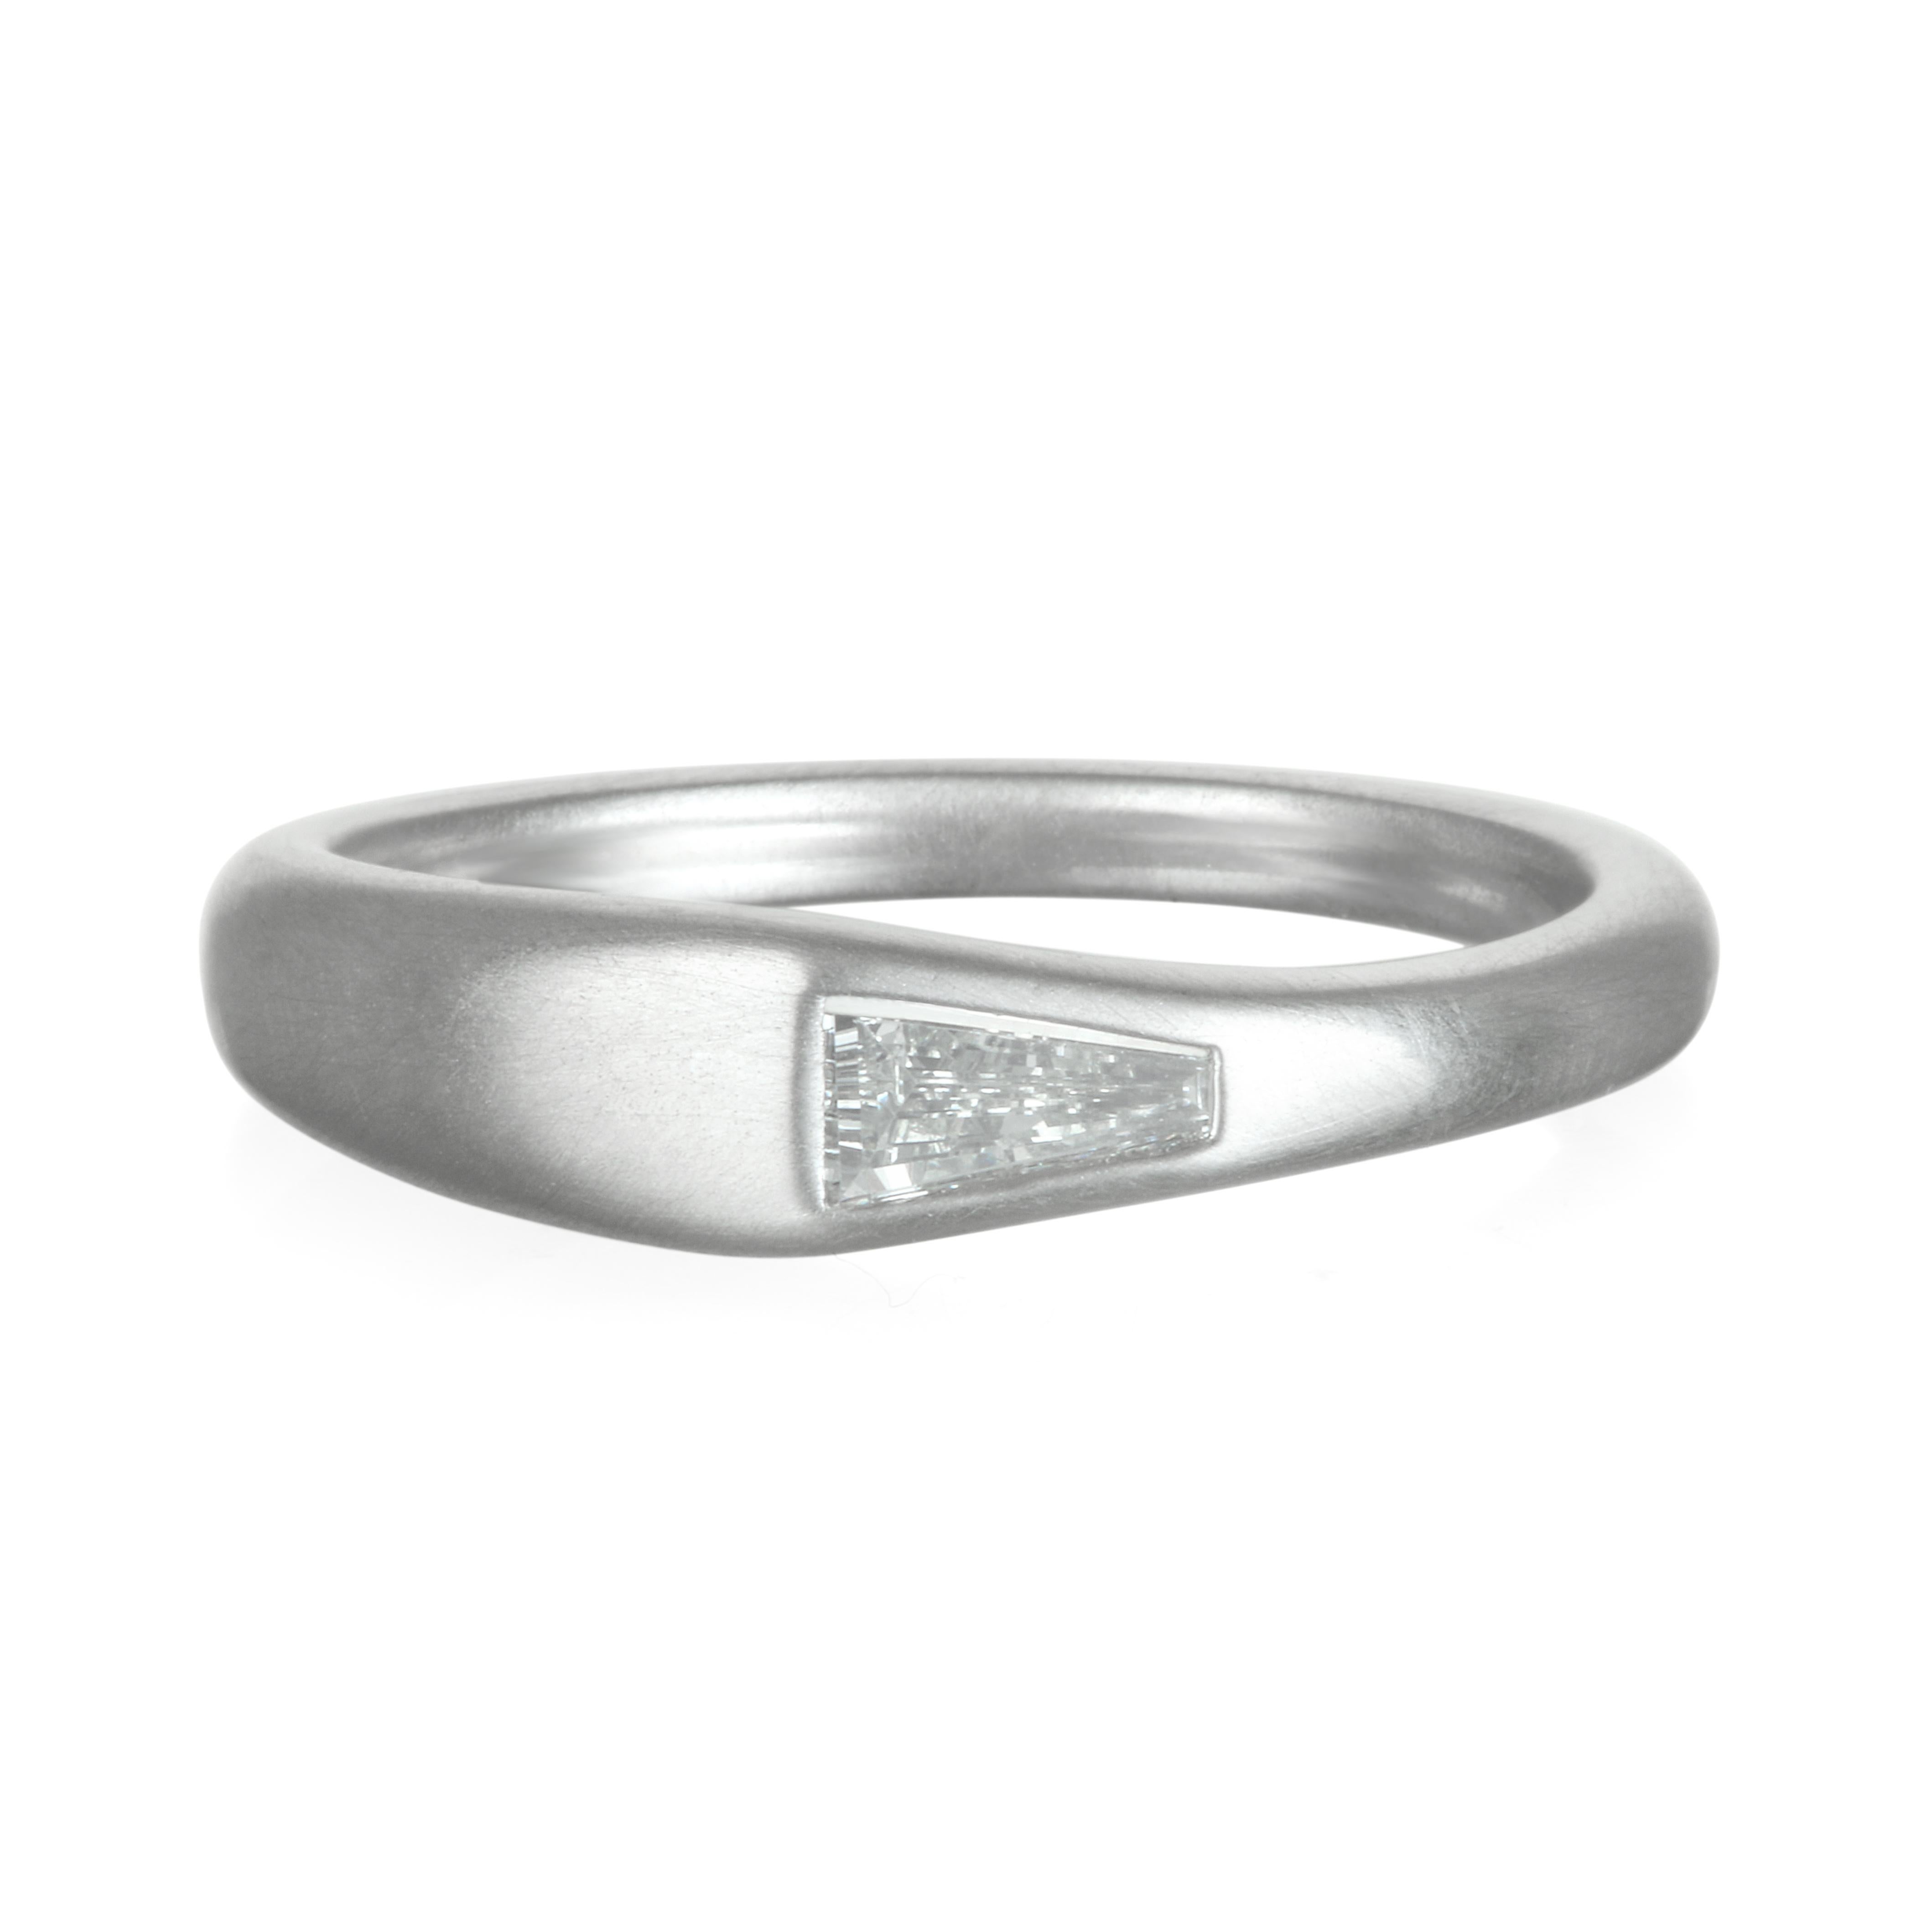 Faye Kim's handcrafted  Platinum diamond ring, set with a tapered baguette diamond is perfect on its own for the modern and minimalistic.  If you prefer to stack, layer it with diamond eternity bands to create our own unique style. 
Size